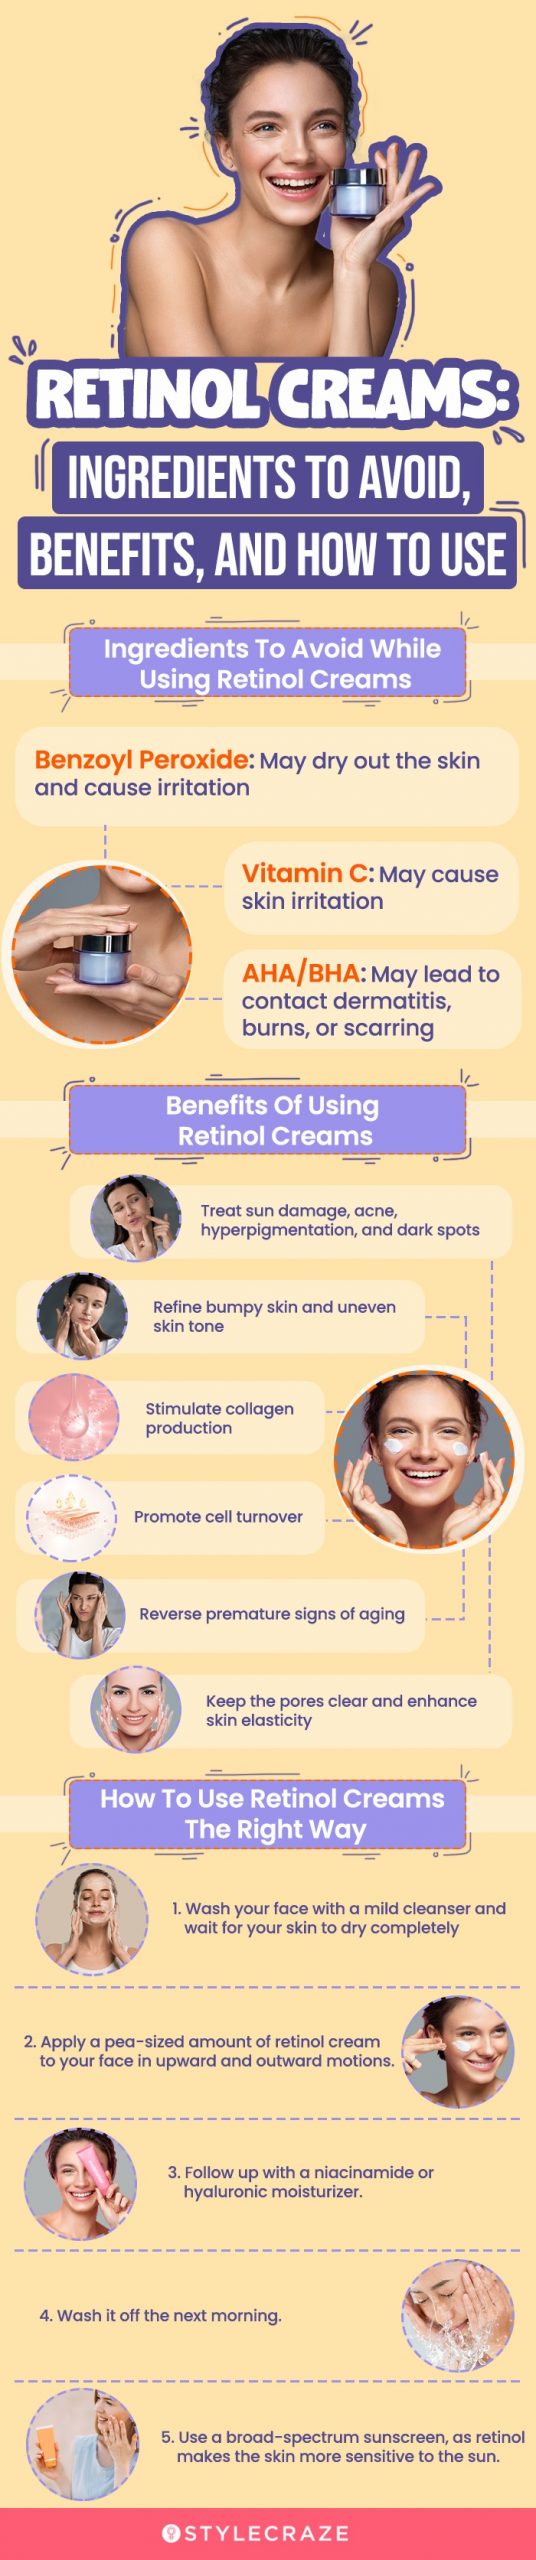 Retinol Creams: Ingredients To Avoid, Benefits, And How To Use (infographic)